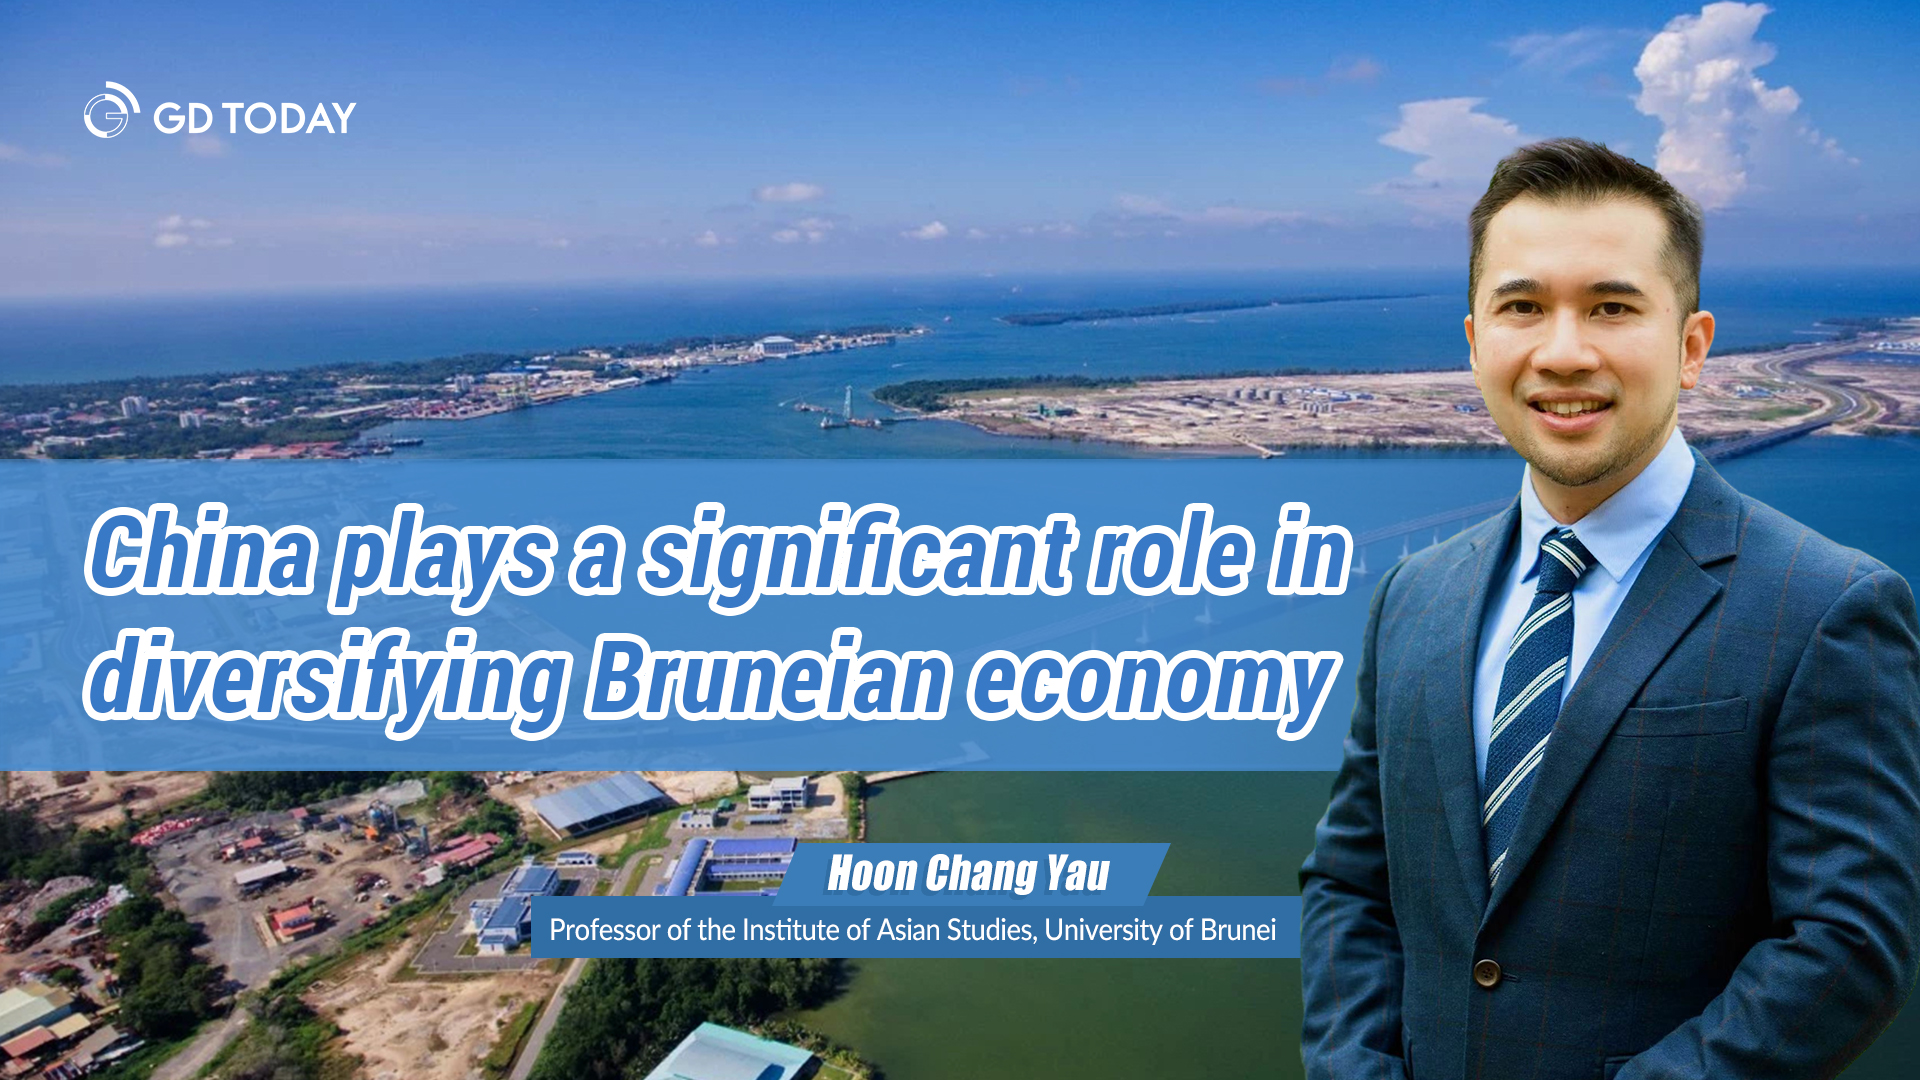 China plays a significant role in diversifying Bruneian economy: University of Brunei professor